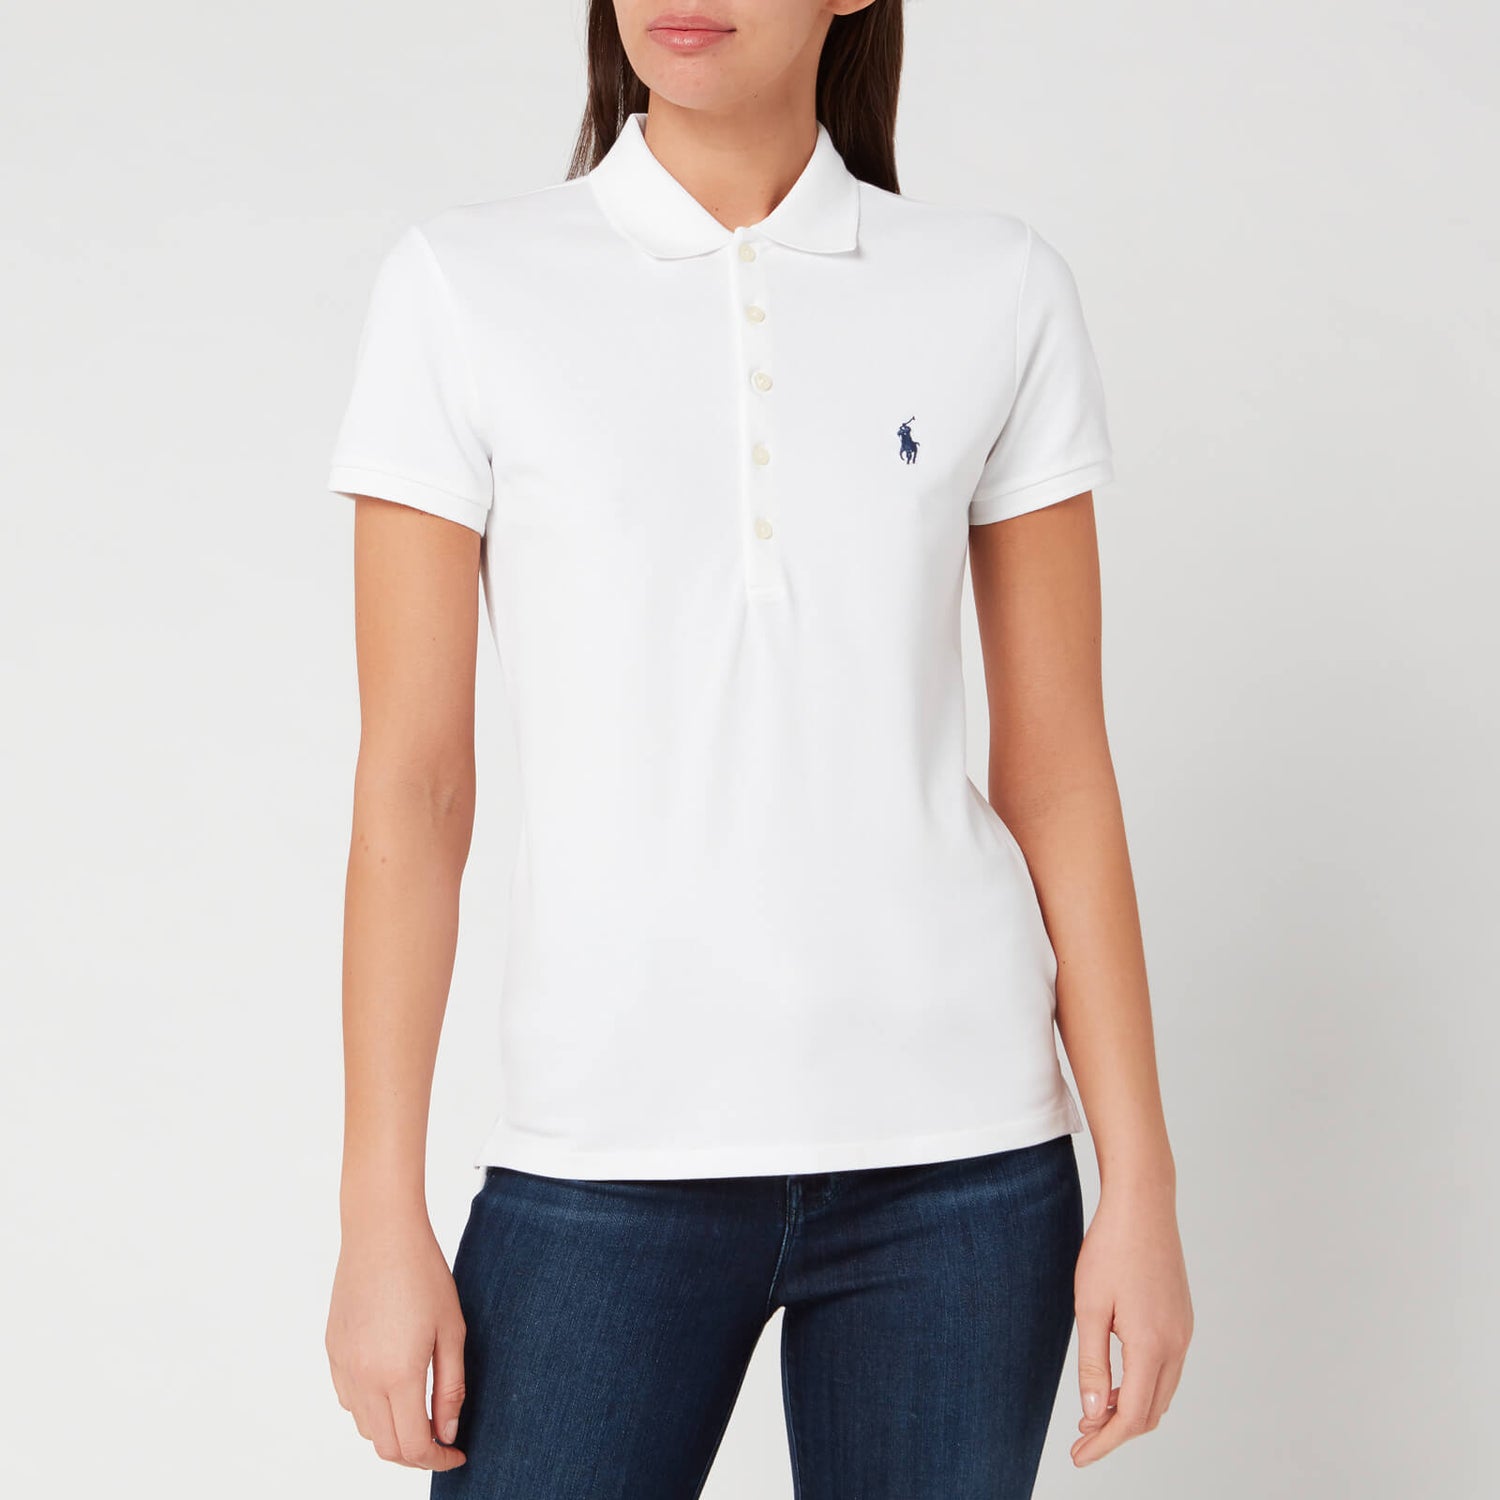 Polo Ralph Lauren Women's Julie Polo Shirt - White - Free UK Delivery ...